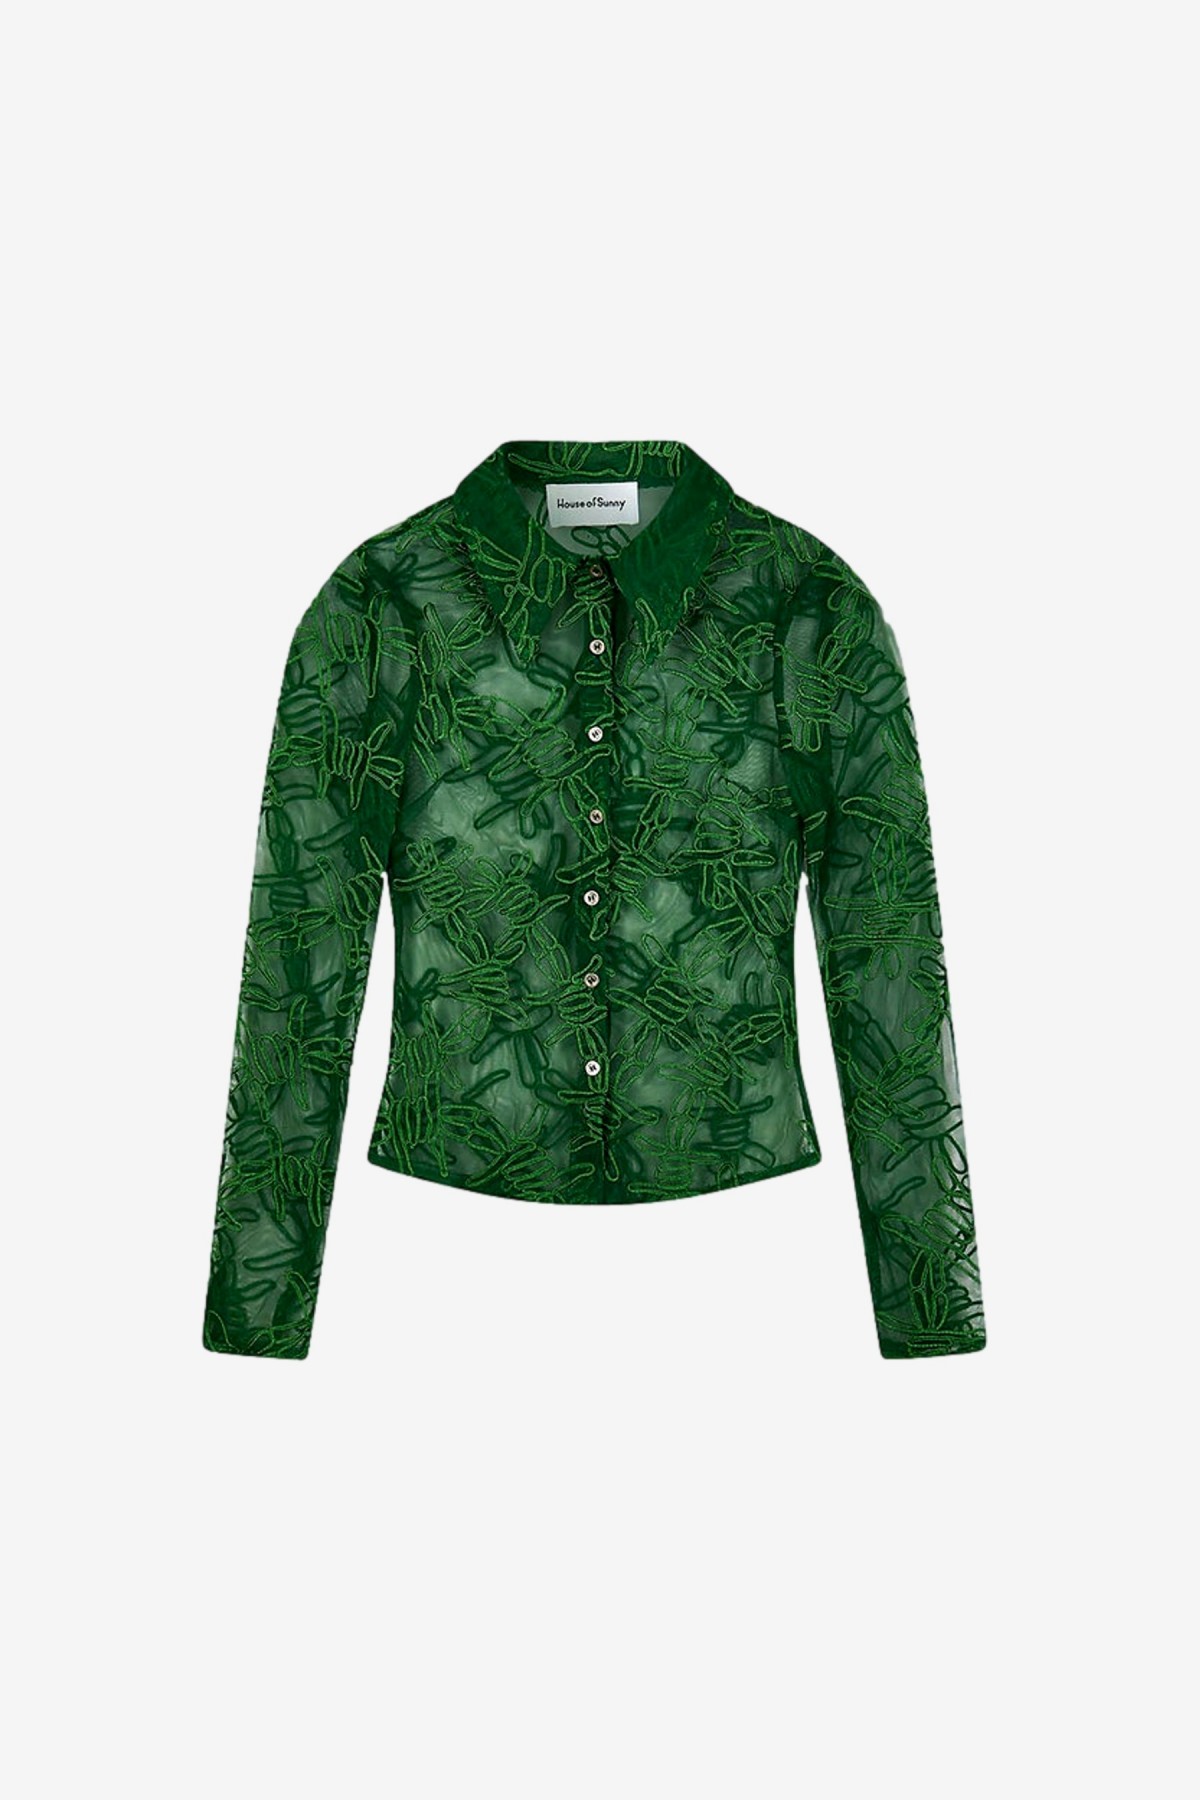 House of Sunny Barbed Wire Applique Shirt in Perfect Green